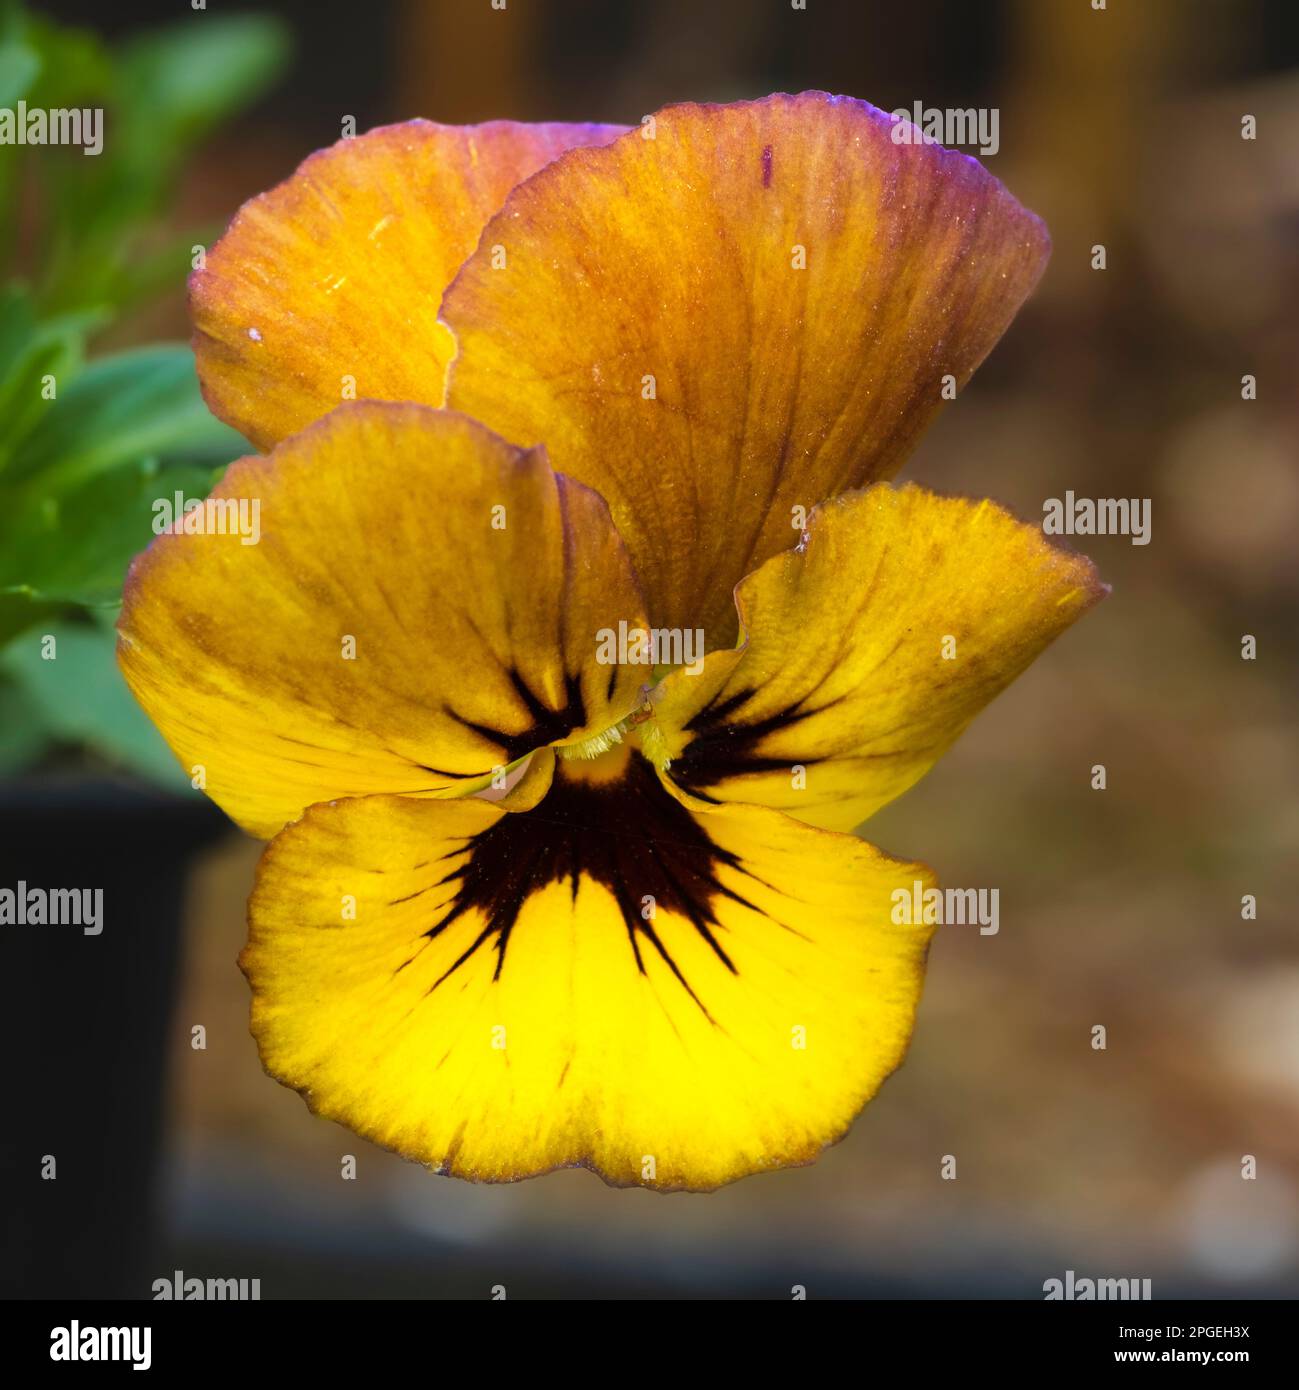 Single bronze, yellow and black flower of the spring to summer blooming small hardy perennial, Viola 'Irish Molly' Stock Photo